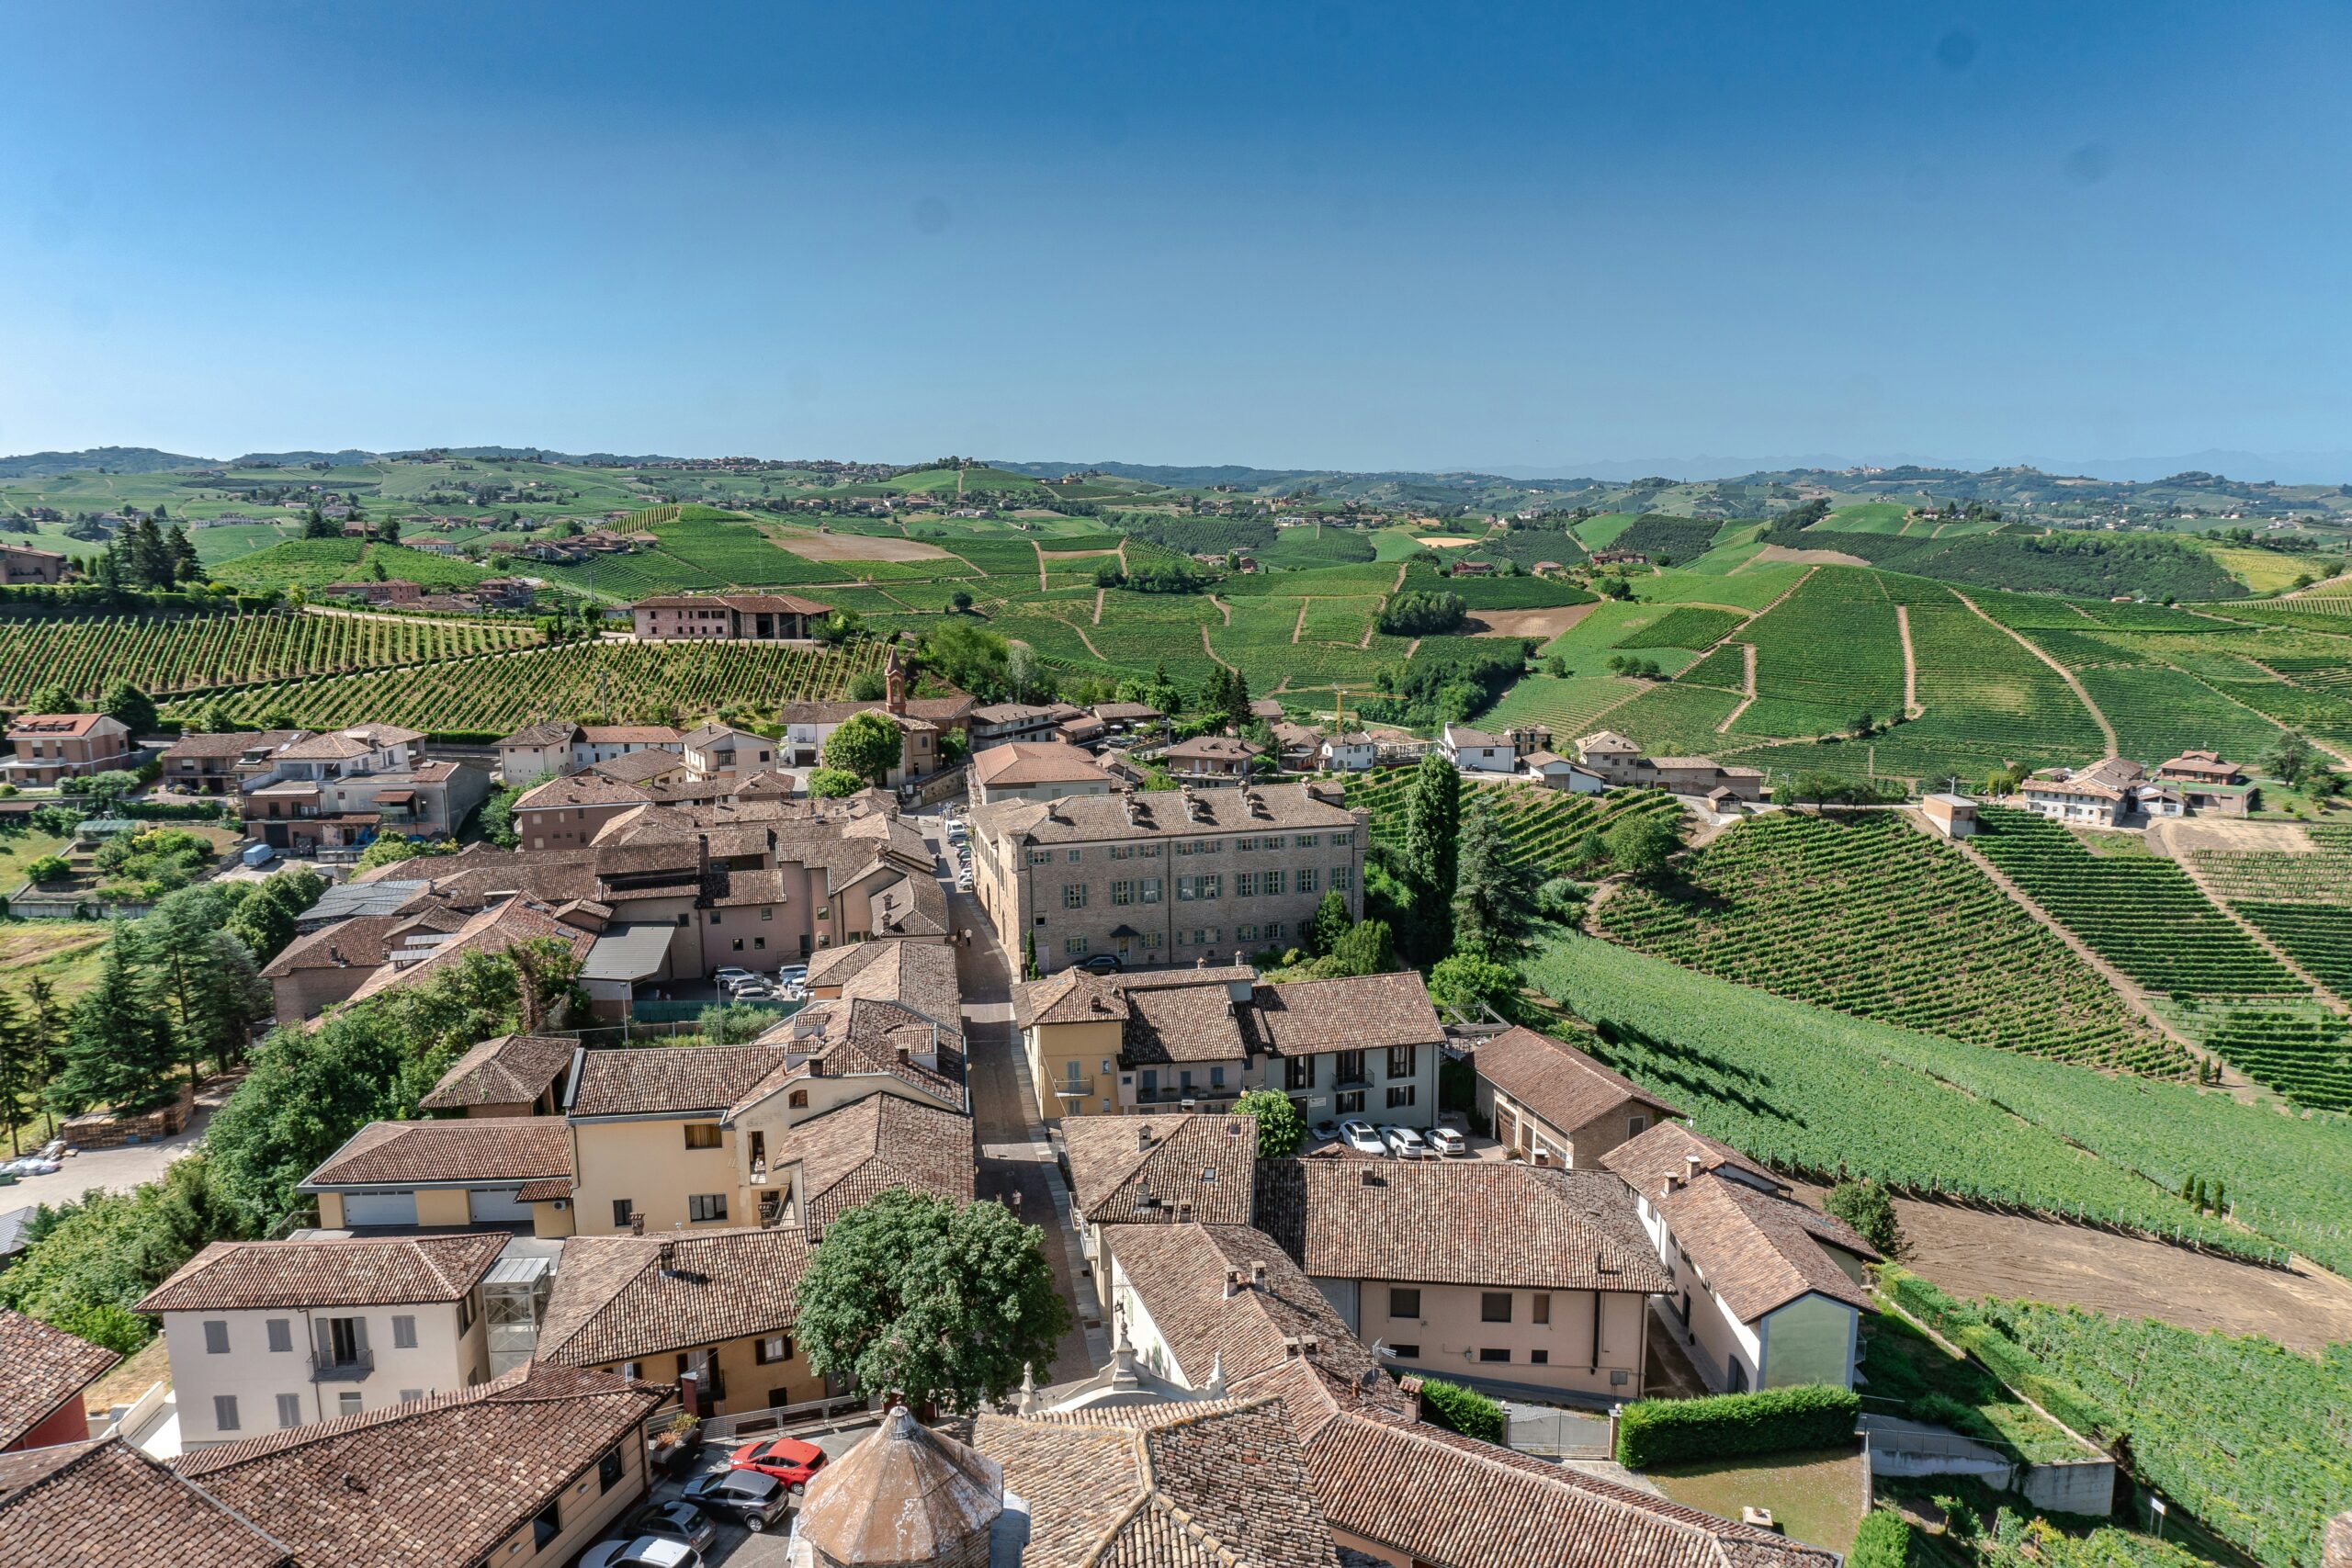 Learn more about Piedmont, the popular region of Italy that offers great lake views. 
pictured: the grassy areas of Piedmont, Italy with a populated village at the center